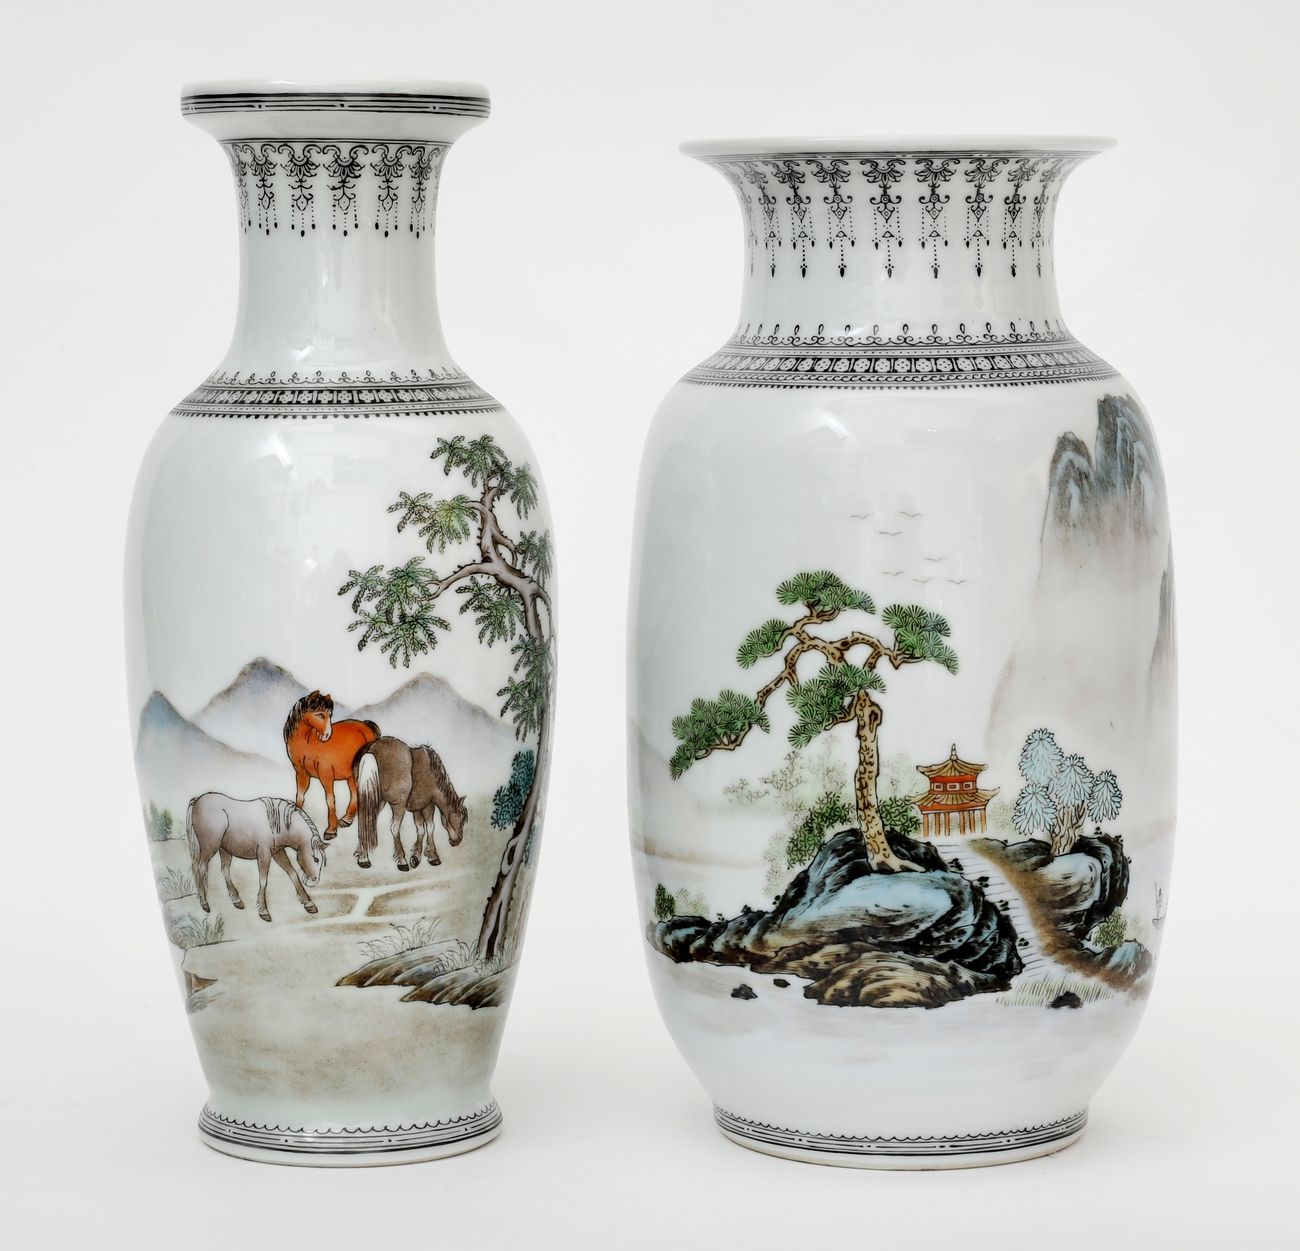 Null China, Republic period (1912-1949)
Two porcelain vases decorated with Famil&hellip;